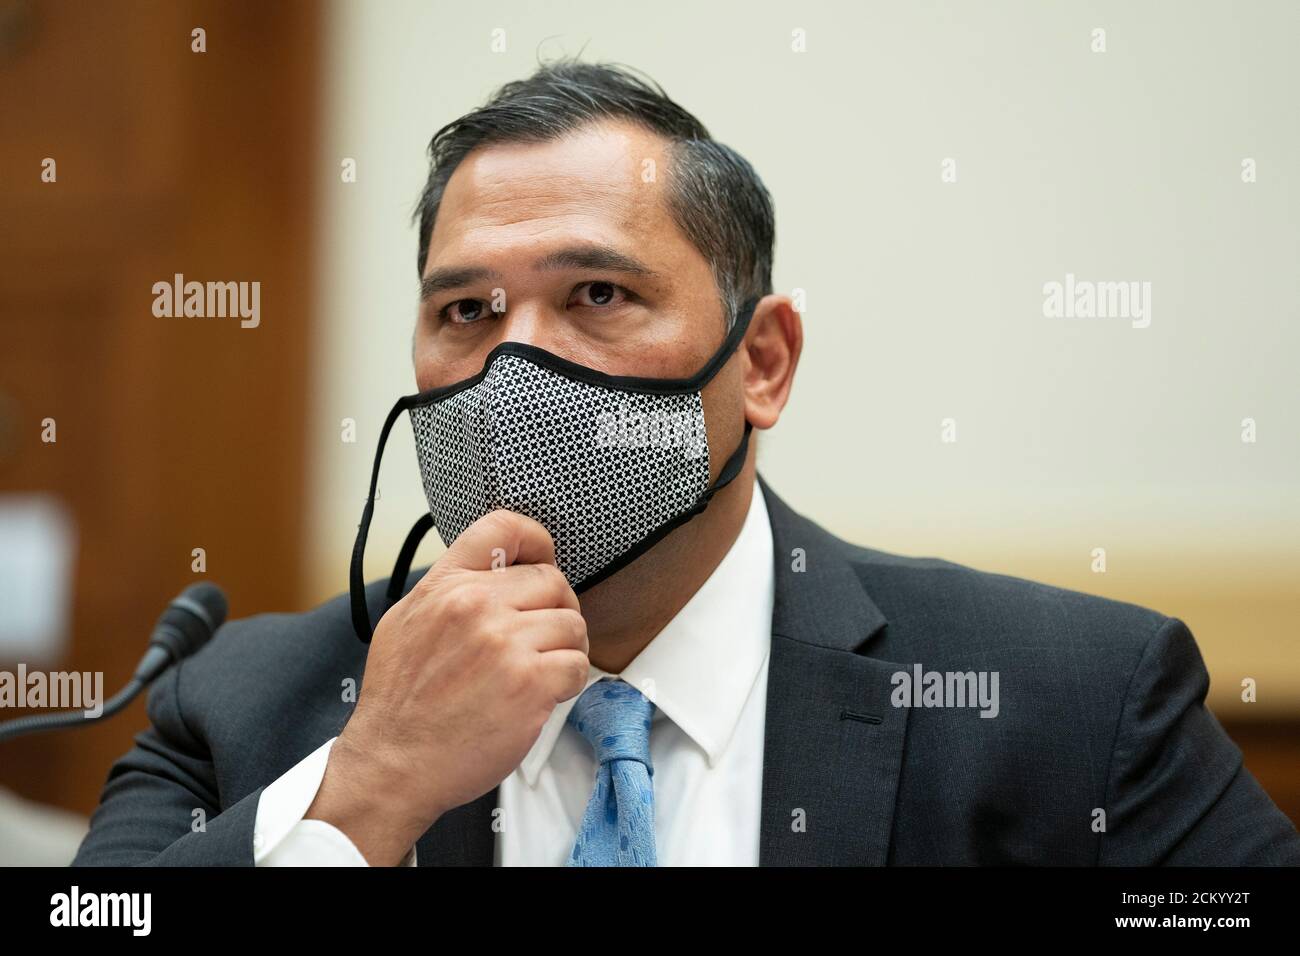 Washington, DC, USA. 16th Sep, 2020. Brian Bulatao, under secretary of state for management at the U.S. Department of State, listens during a House Foreign Affairs Committee hearing in Washington, DC, U.S., on Wednesday, Sept. 16, 2020. The hearing is investigating the firing of State Department Inspector General Steve Linick. Credit: Stefani Reynolds/Pool via CNP | usage worldwide Credit: dpa/Alamy Live News Stock Photo